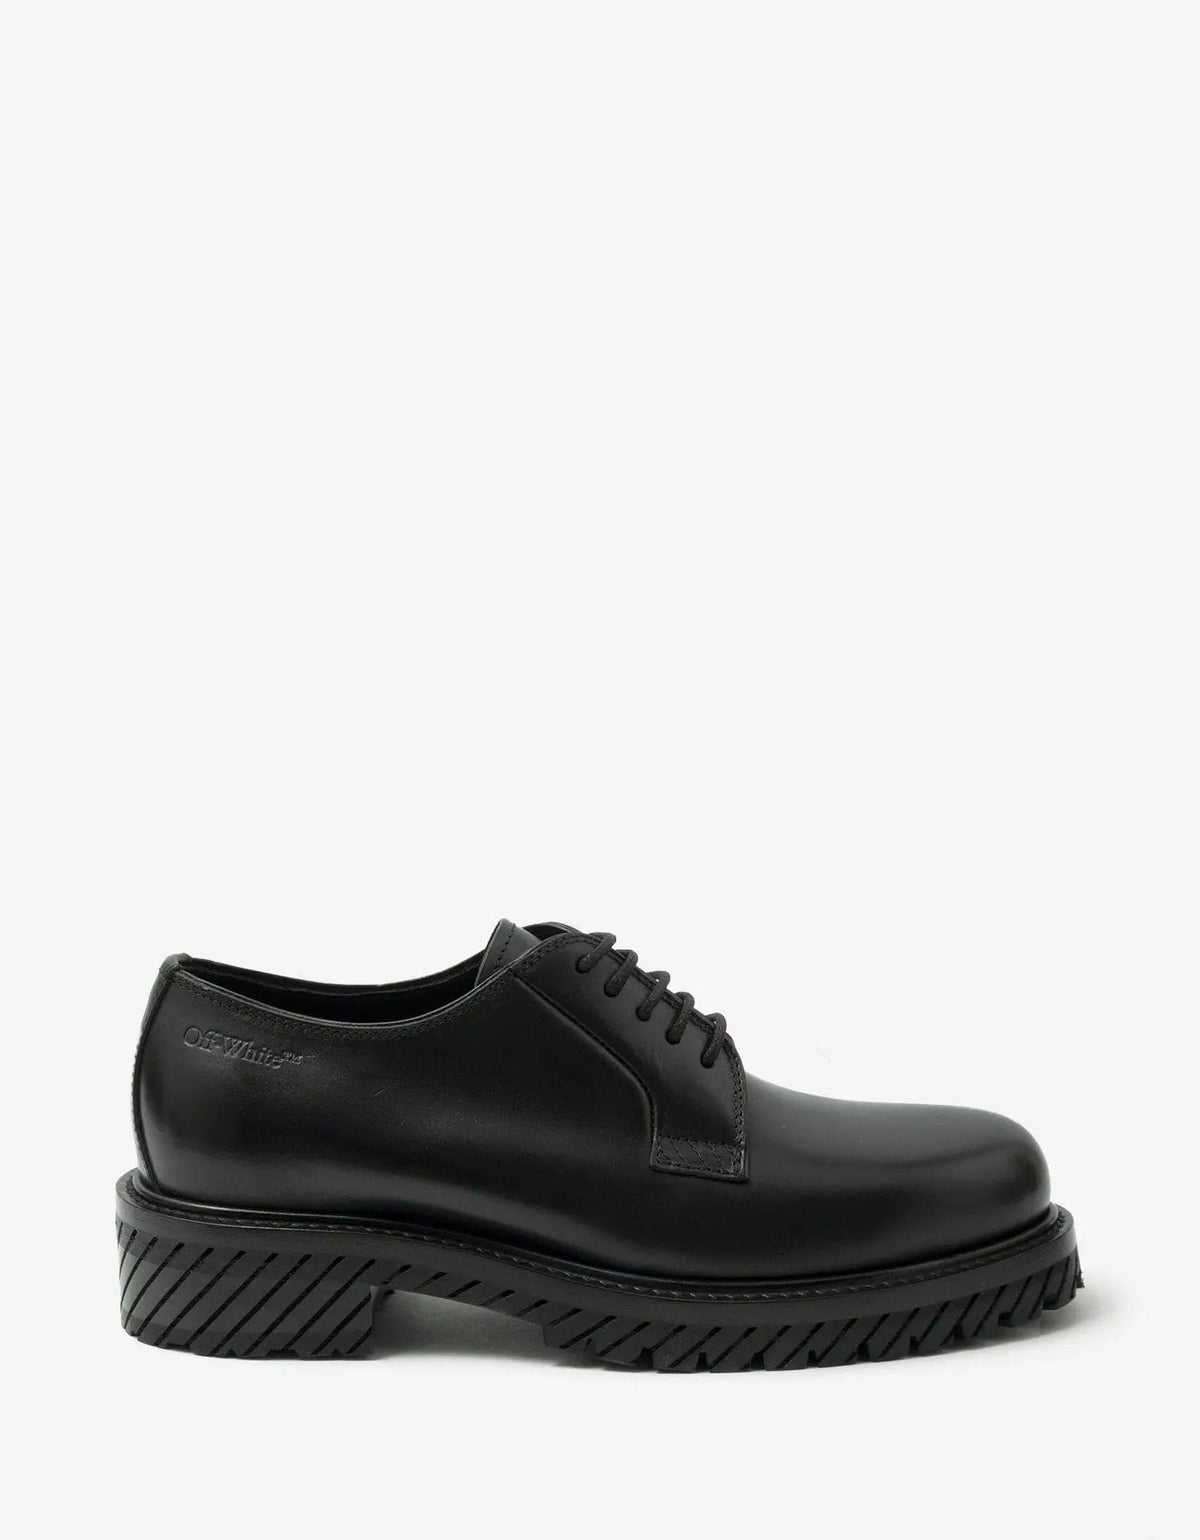 Off-White Off-White Black Military Derby Shoes